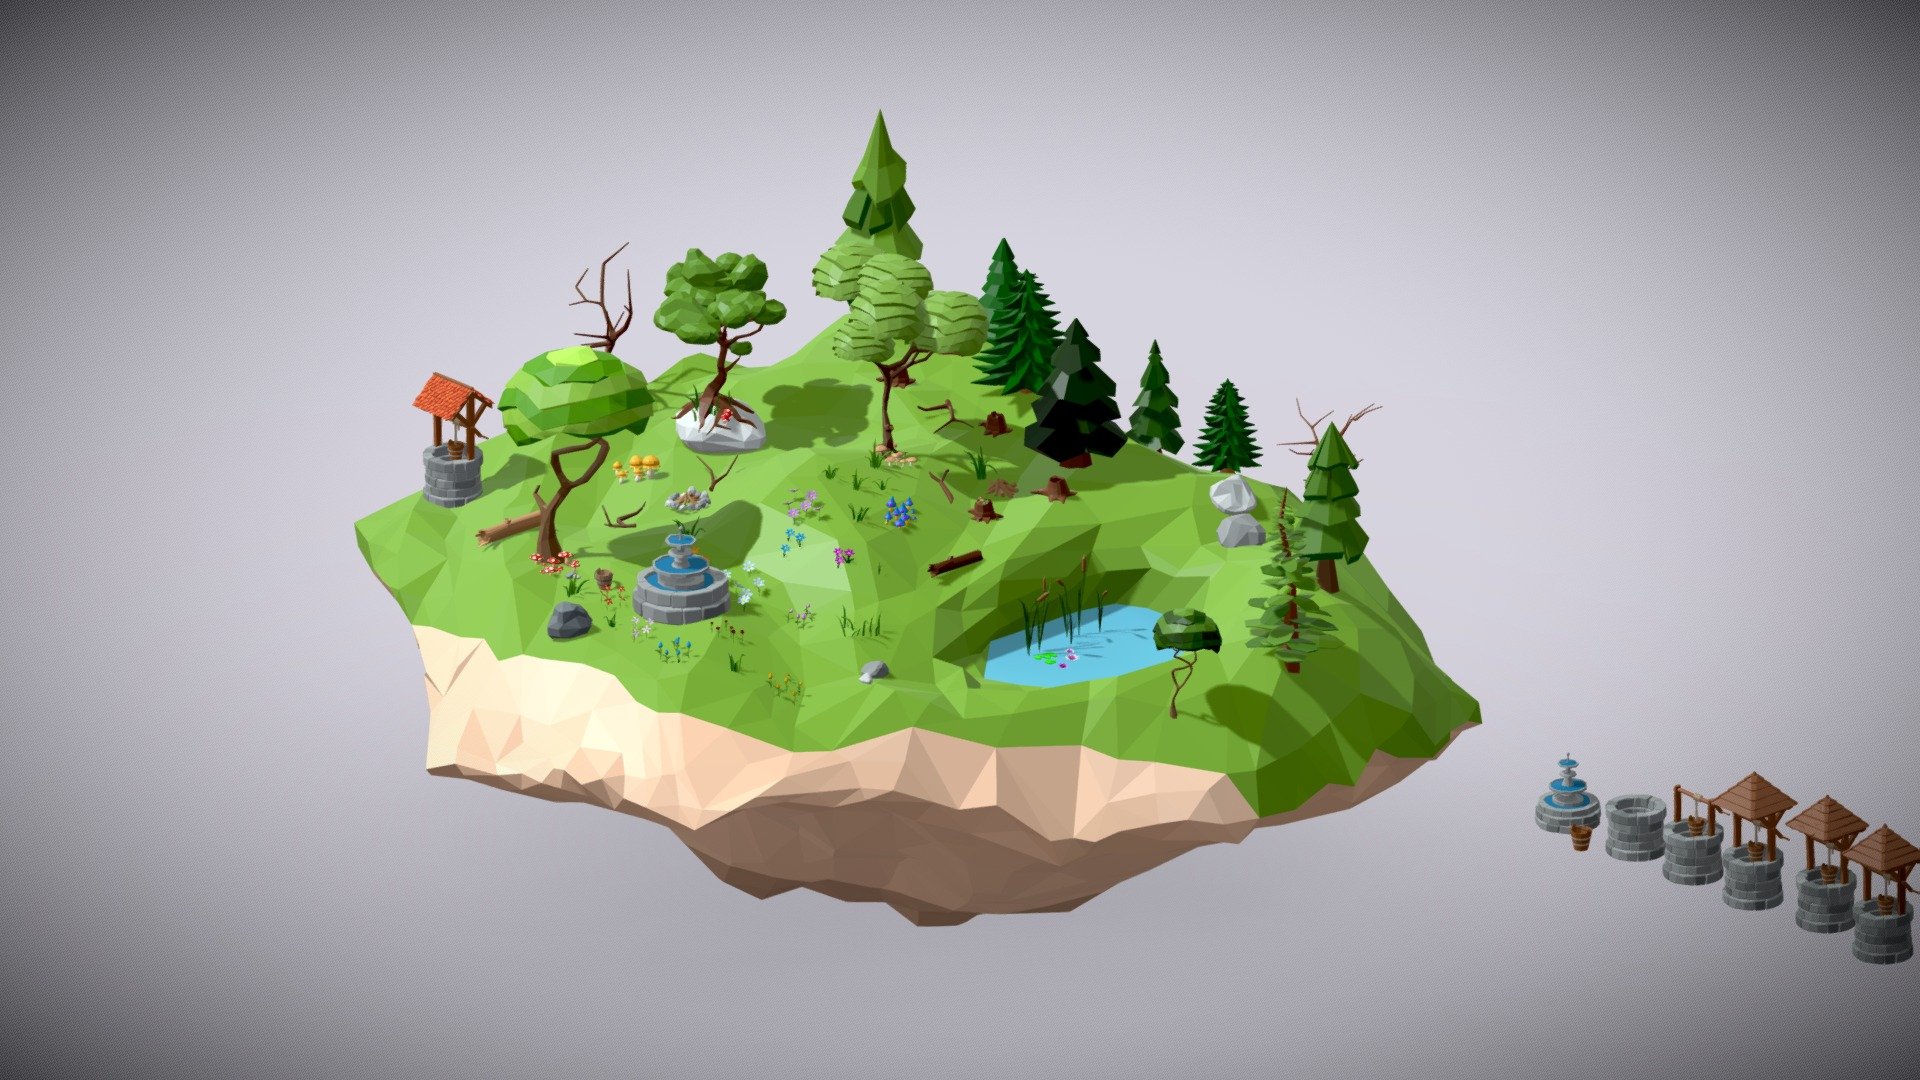 A stylized Low Poly Nature and Props Pack with trees, flowers, plants, stones, grass, wells/fountains and more.
Game ready assets suitable for mobile games and VR/AR experience.

This package includes 173 unique prefabs. All share a single 256x256 texture to increase performance. 

This package can be purchased on ArtStation and the Unity Asset Store (seller: Pure Poly).

–Package Content–

•   Environment/Other (20x) – island, buckets, campfire, fountains, wells, stones

•   Trees &amp; tree trunks/stumps (25x) – trees, fir tree, leafless tree, trunks/stumps, limbs

•   Flowers (57x) – daisies, tulips, roses

•   Grass (23x)

•   Mushrooms (37x) – fly agaric, round mushrooms, fantasy

•   Water plants (11x) – reed, water lilies

Also, if you like this package, please leave a review to let us and others know.

Free assets from this pack:





Fly agaric




Blue tulips




Winding tree


 - Low Poly Nature and Props Pack - Buy Royalty Free 3D model by purepoly 3d model